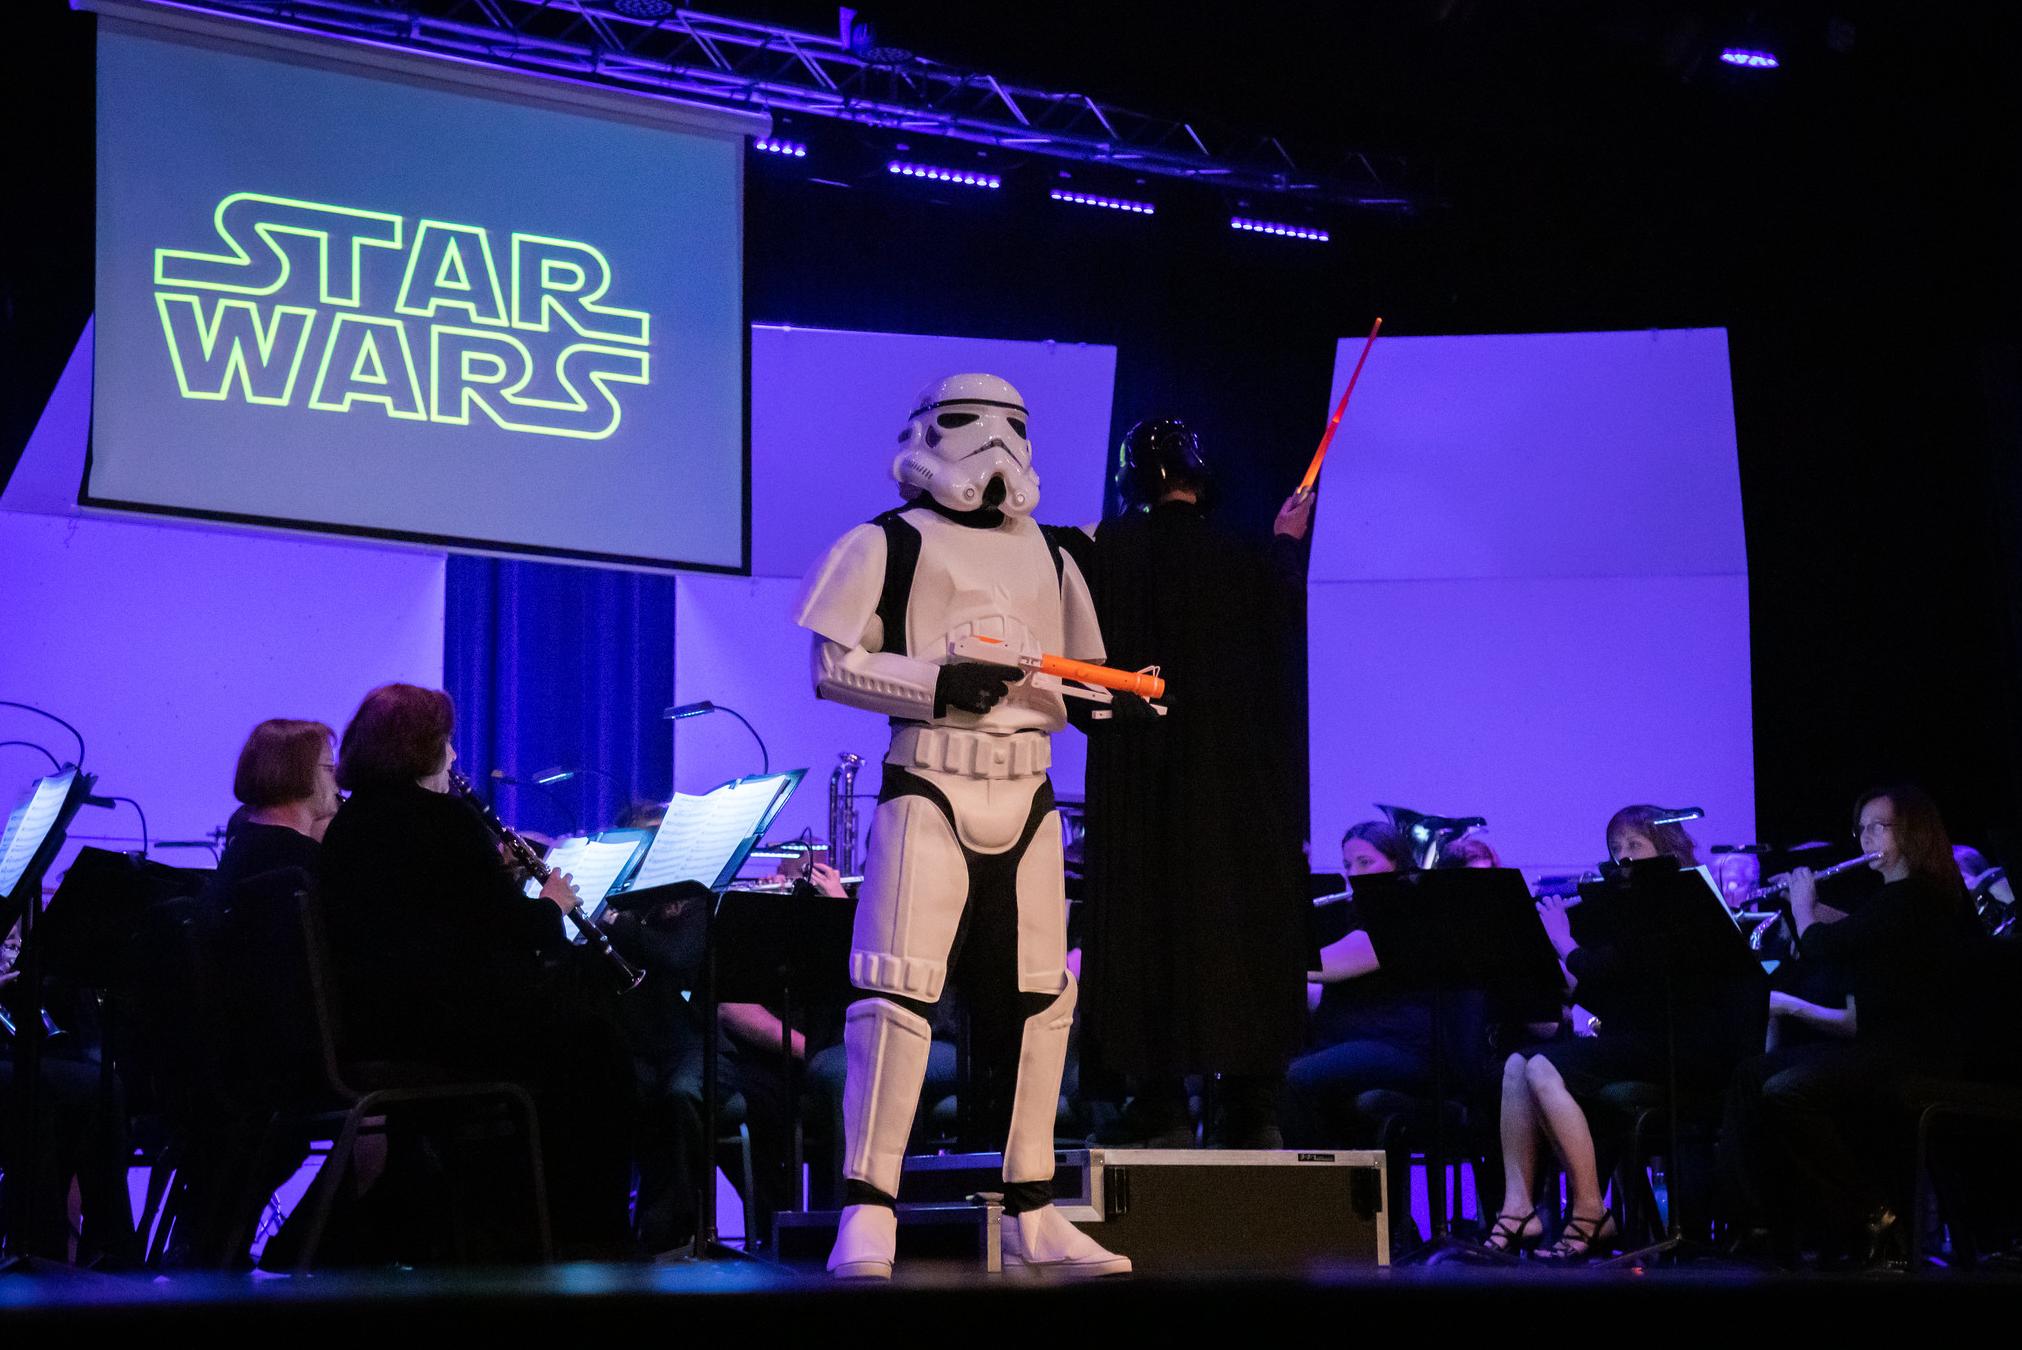 storm trooper standing on stage